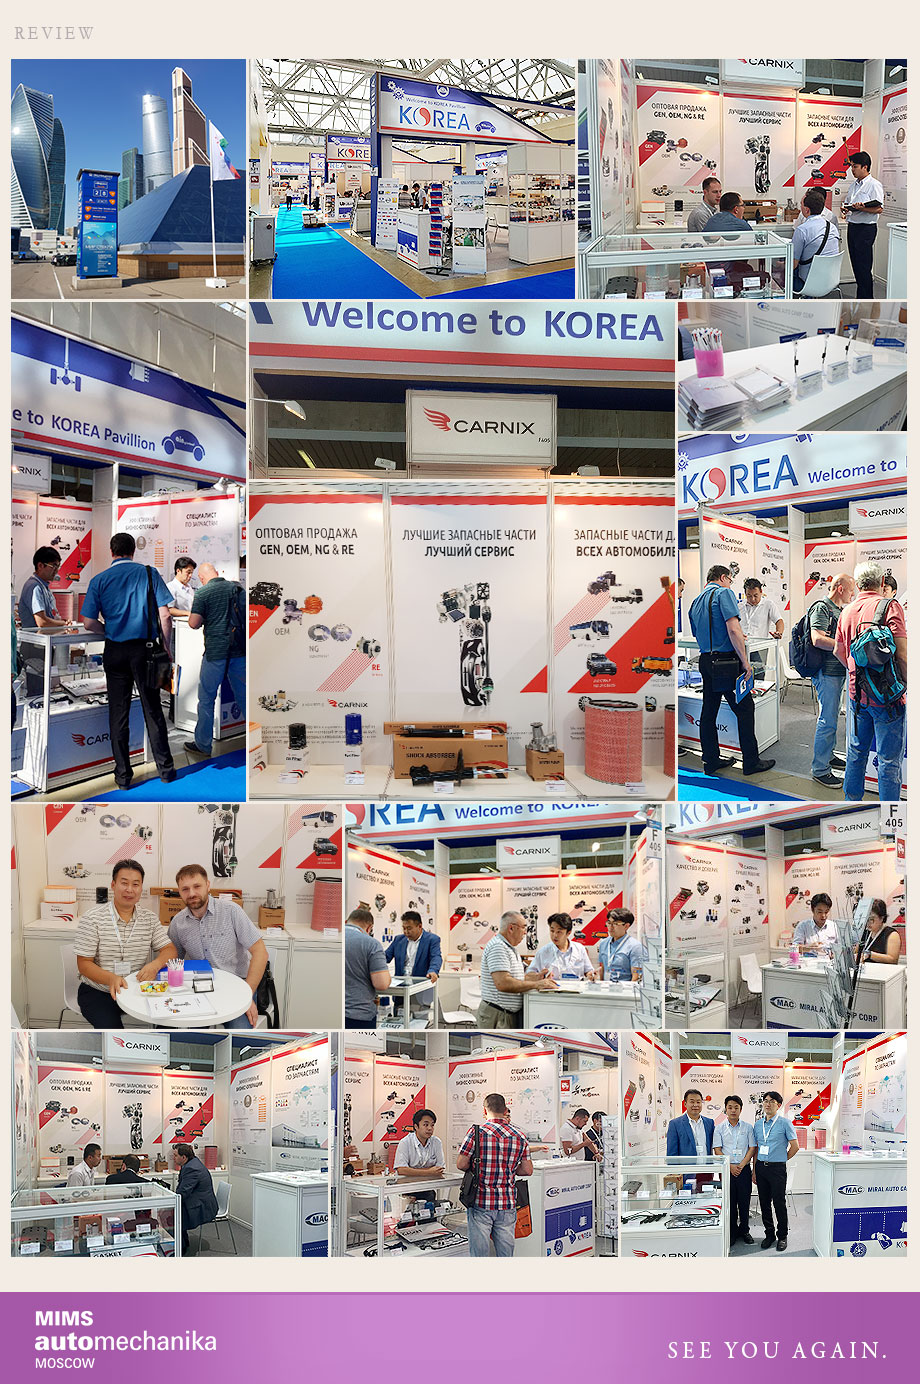 Review of MIMS Automechanika Moscow 2017 - Miral Auto Camp Corp.